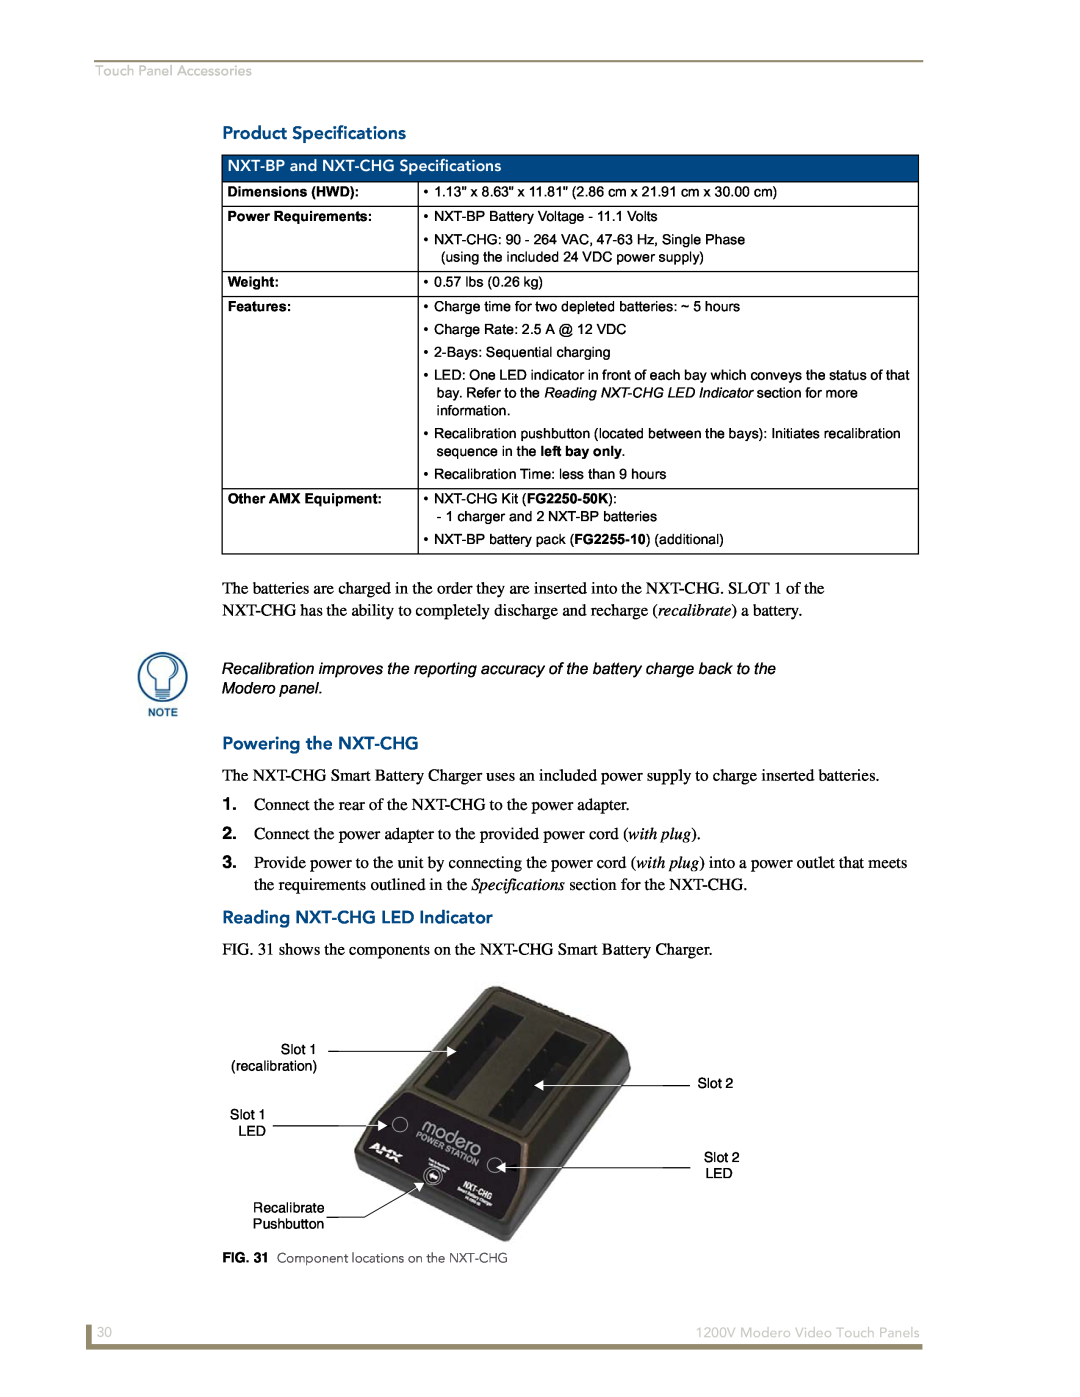 AMX NXT-1200V manual Product Specifications, Powering the NXT-CHG, Connect the rear of the NXT-CHG to the power adapter 